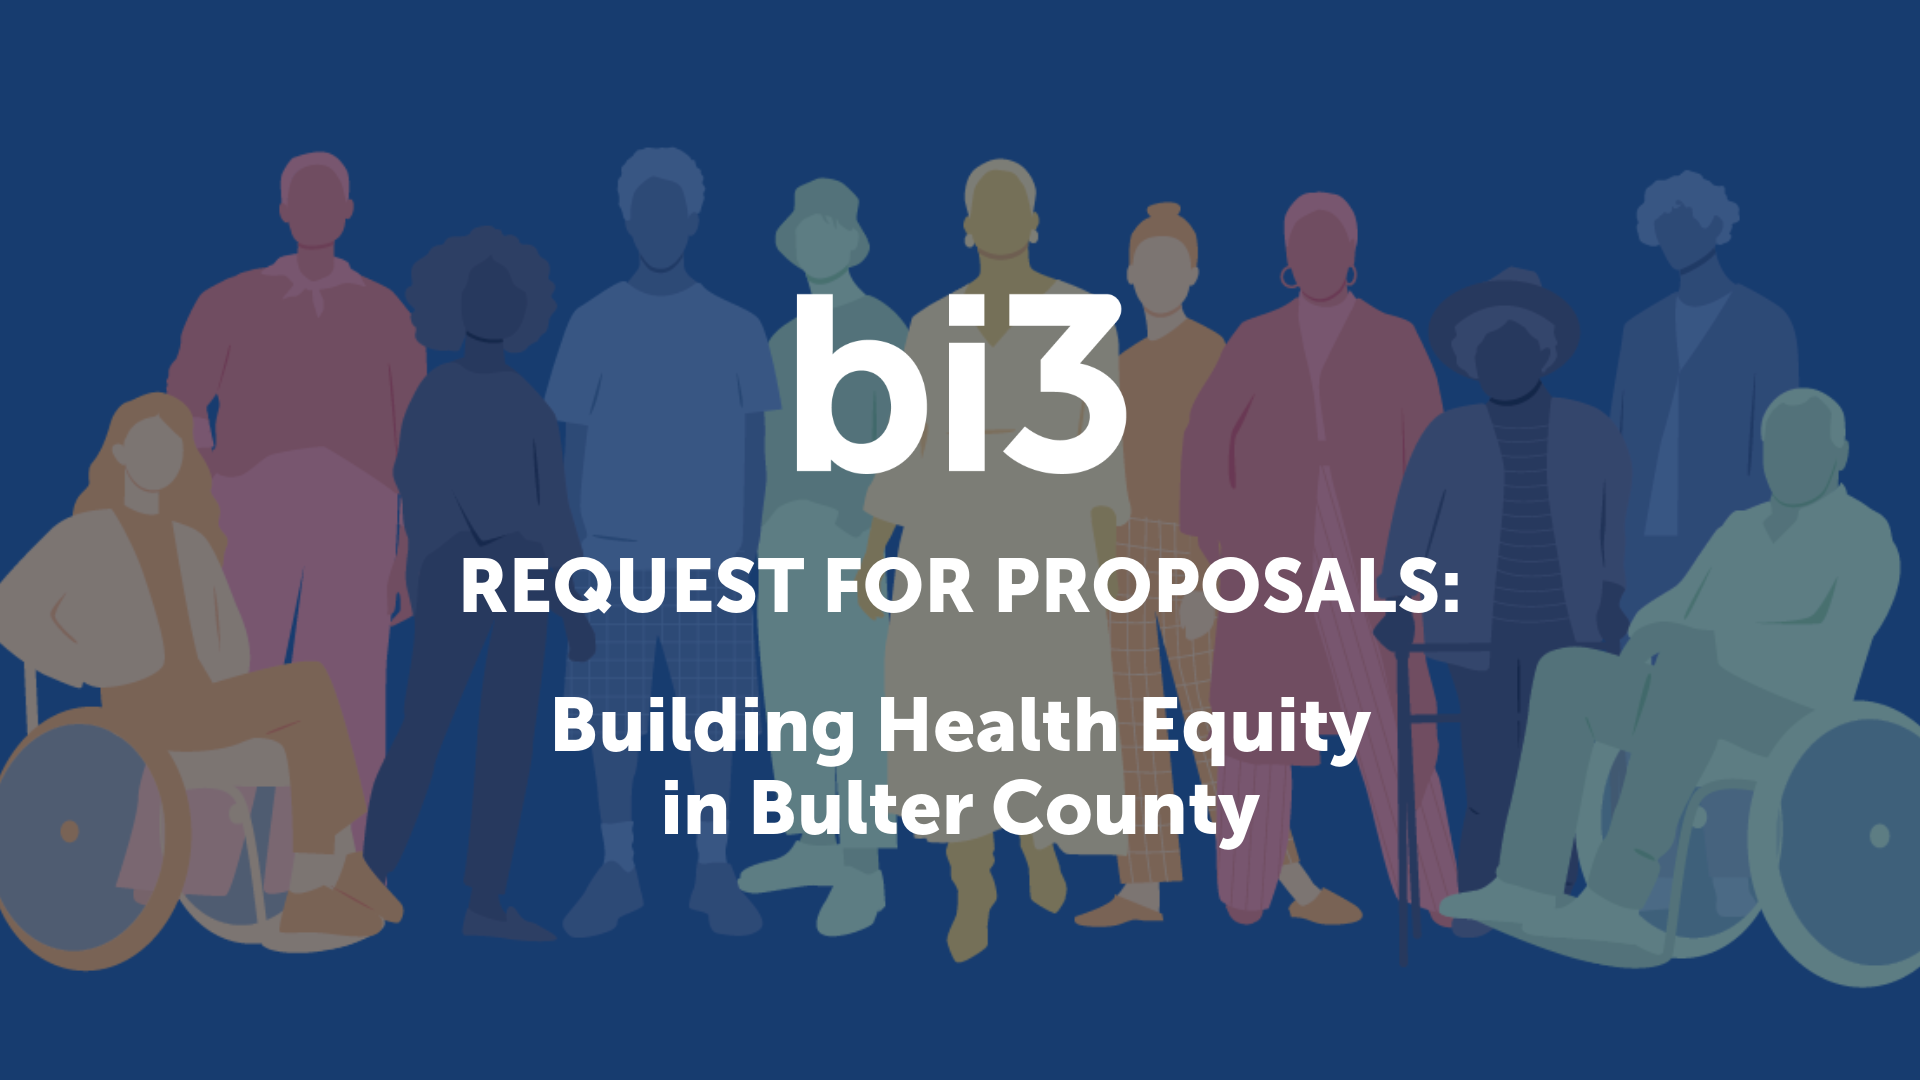 Building Health Equity in Butler County RFP